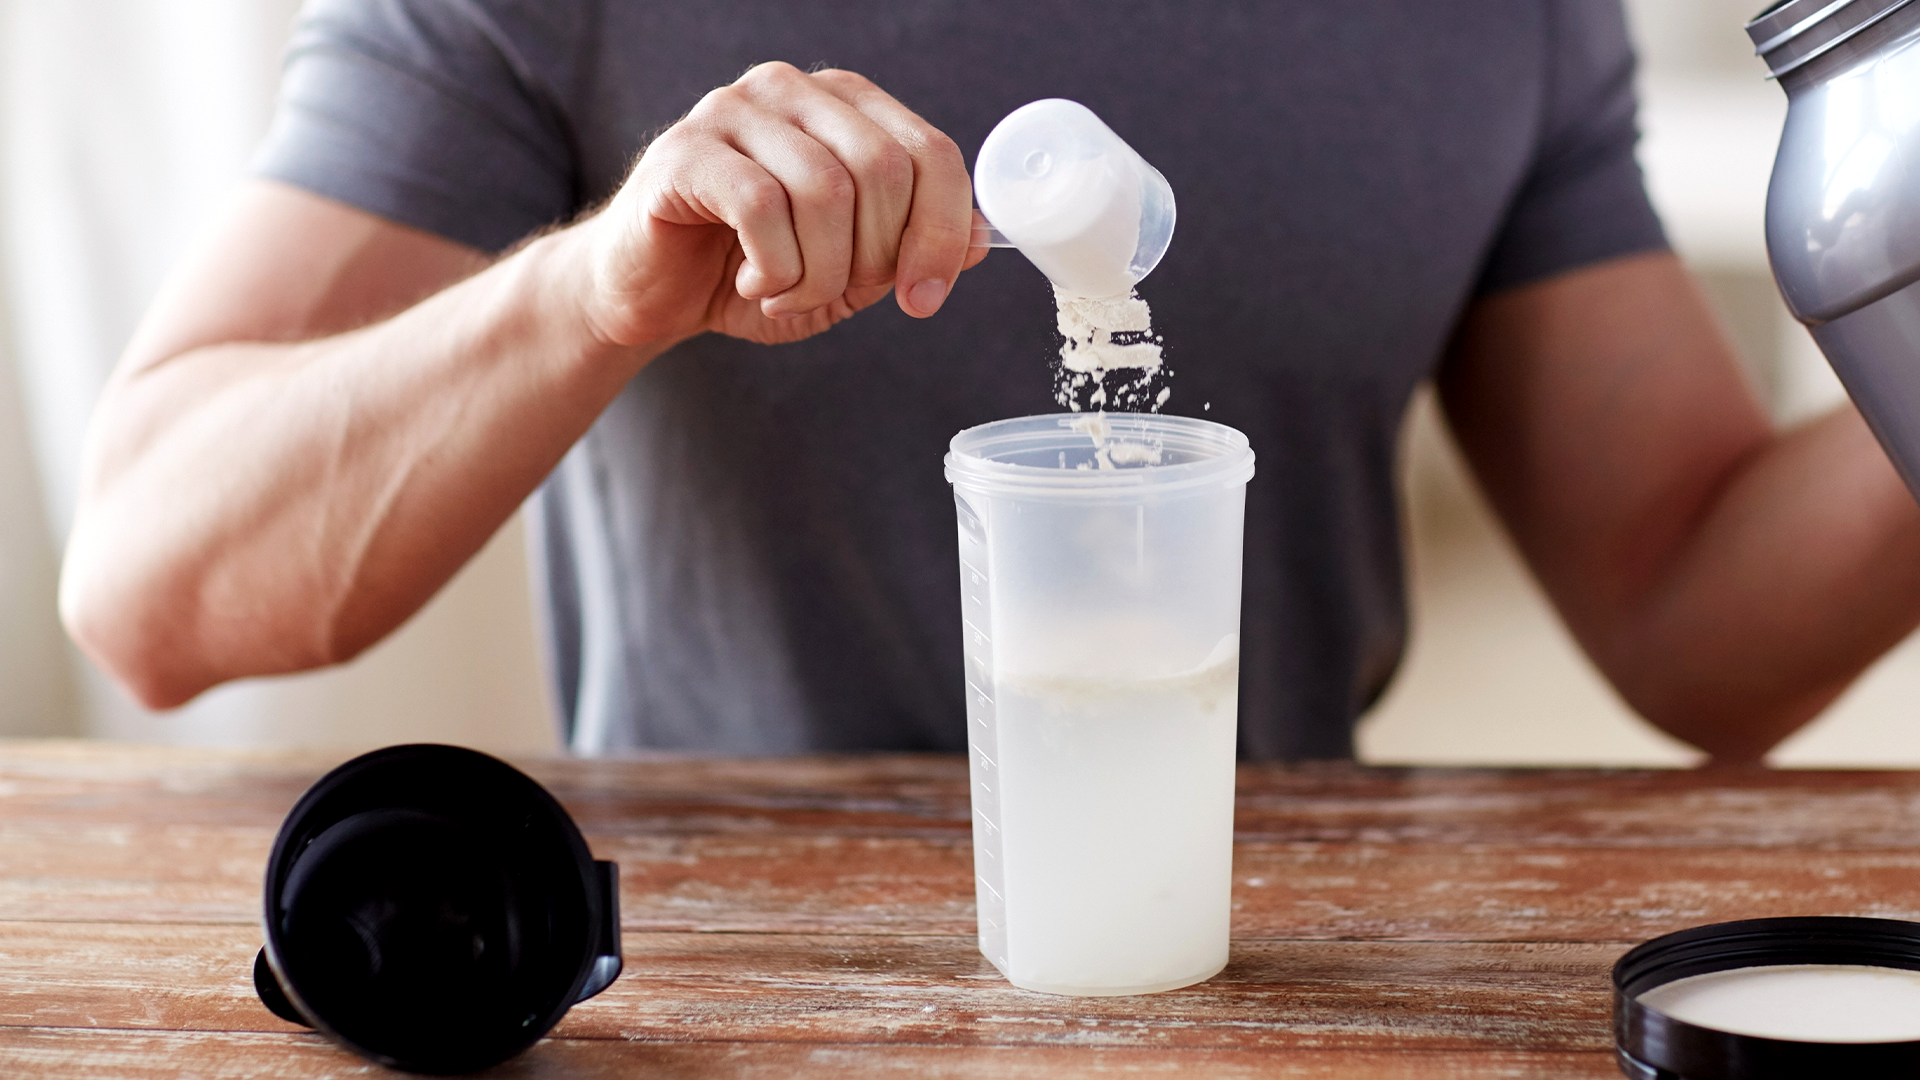 How to increase protein intake for building muscle